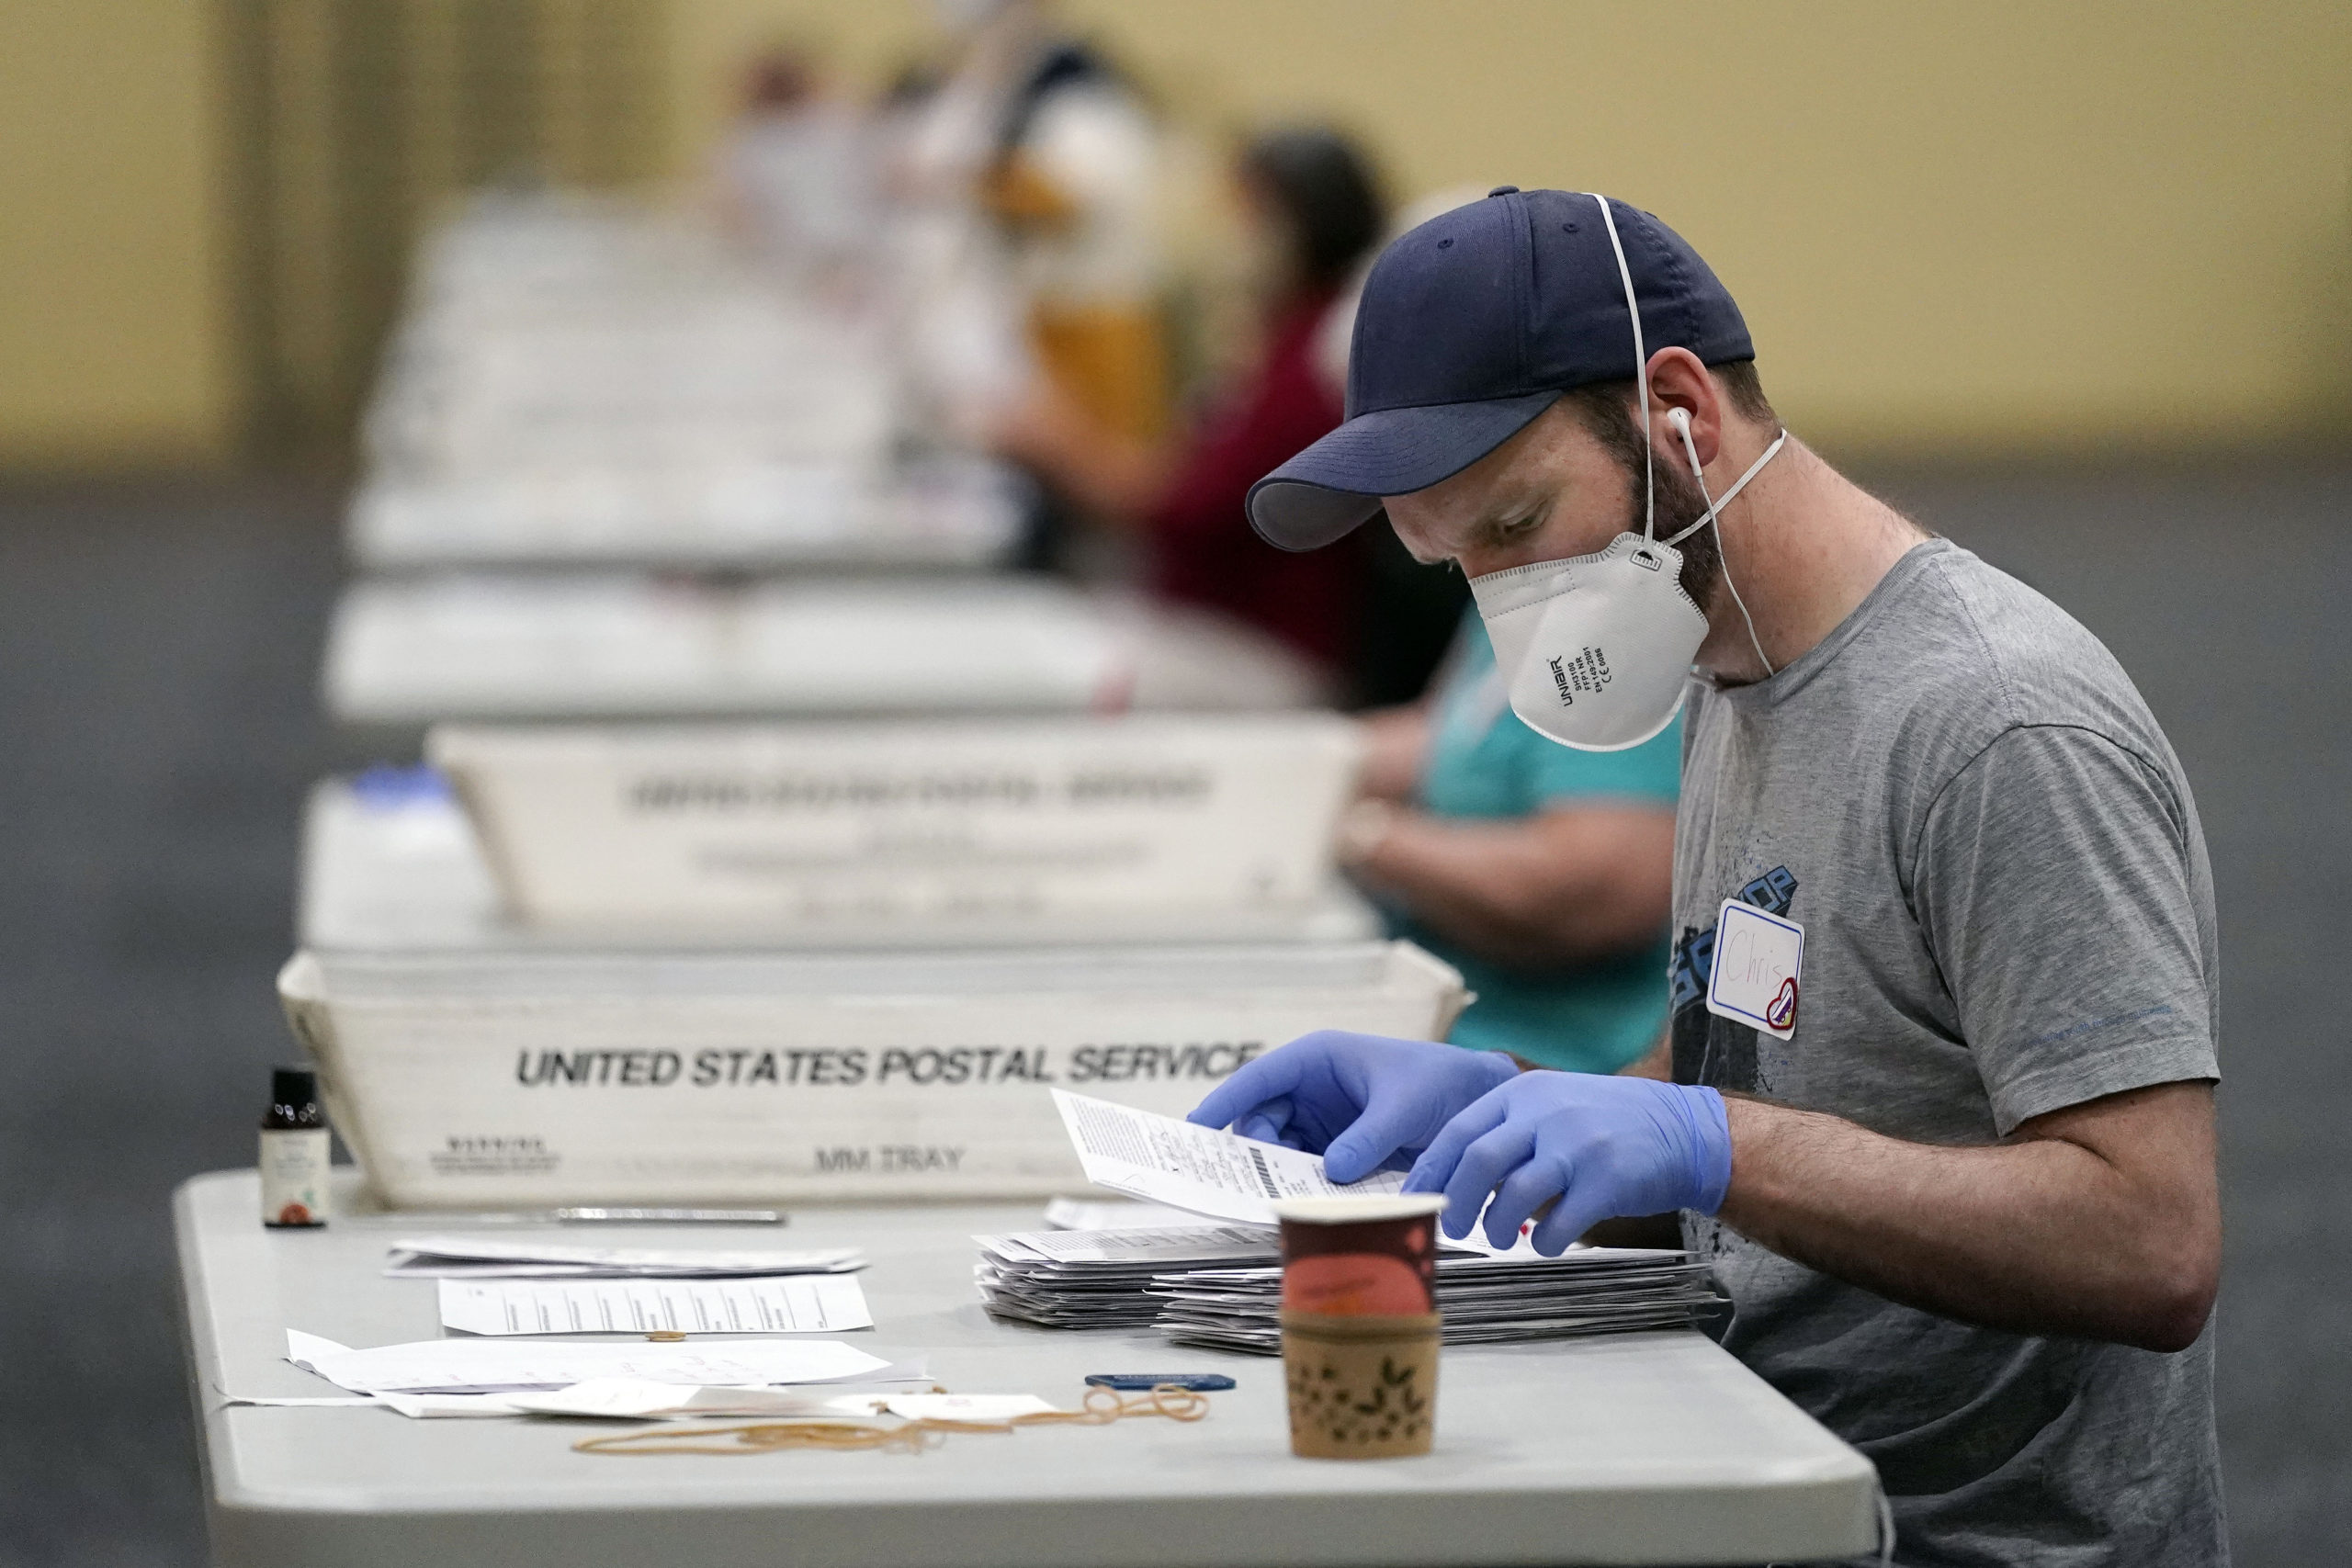 Workers prepare mail-in ballots for counting, Nov. 4, 2020, at the convention center in Lancaster, Pa. outlets developing democracy beats are delving into the laws that govern elections and the people who administer them — areas that traditionally received little in-depth coverage when compared to the horserace